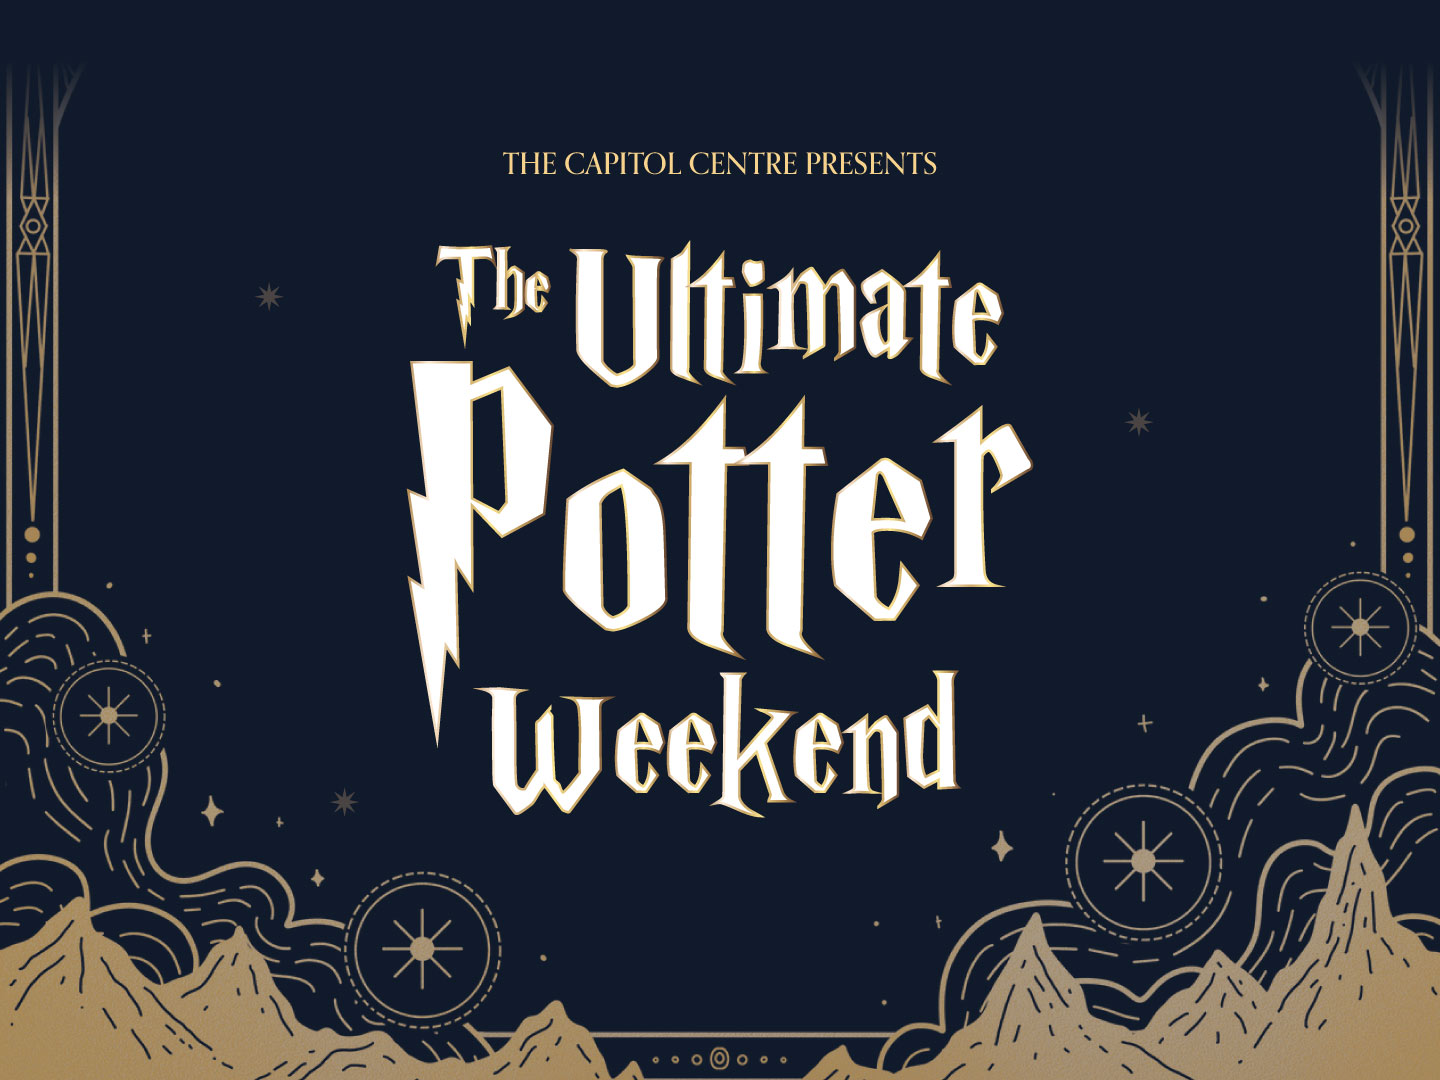 Capitol Centre presents The Ultimate Potter Weekend!